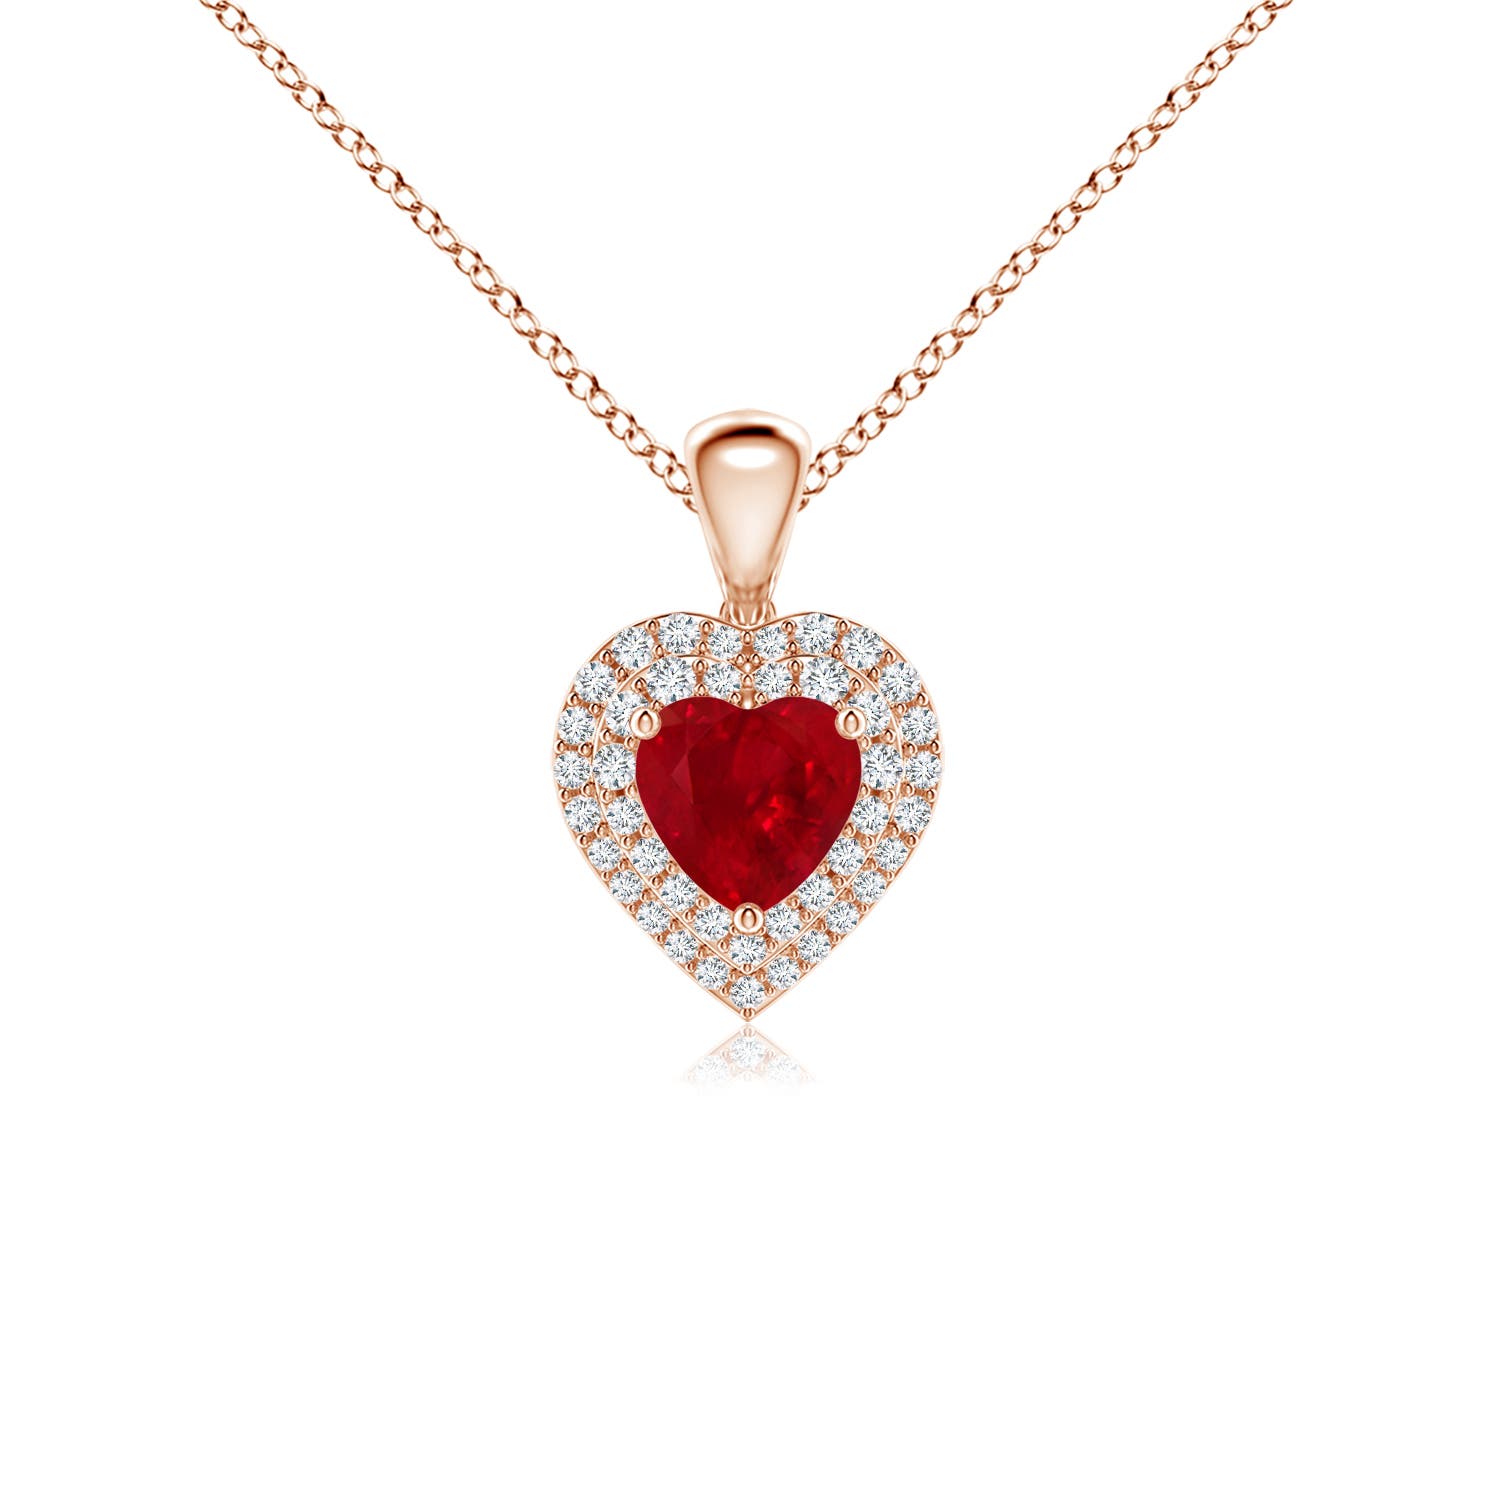 AAA - Ruby / 0.94 CT / 14 KT Rose Gold